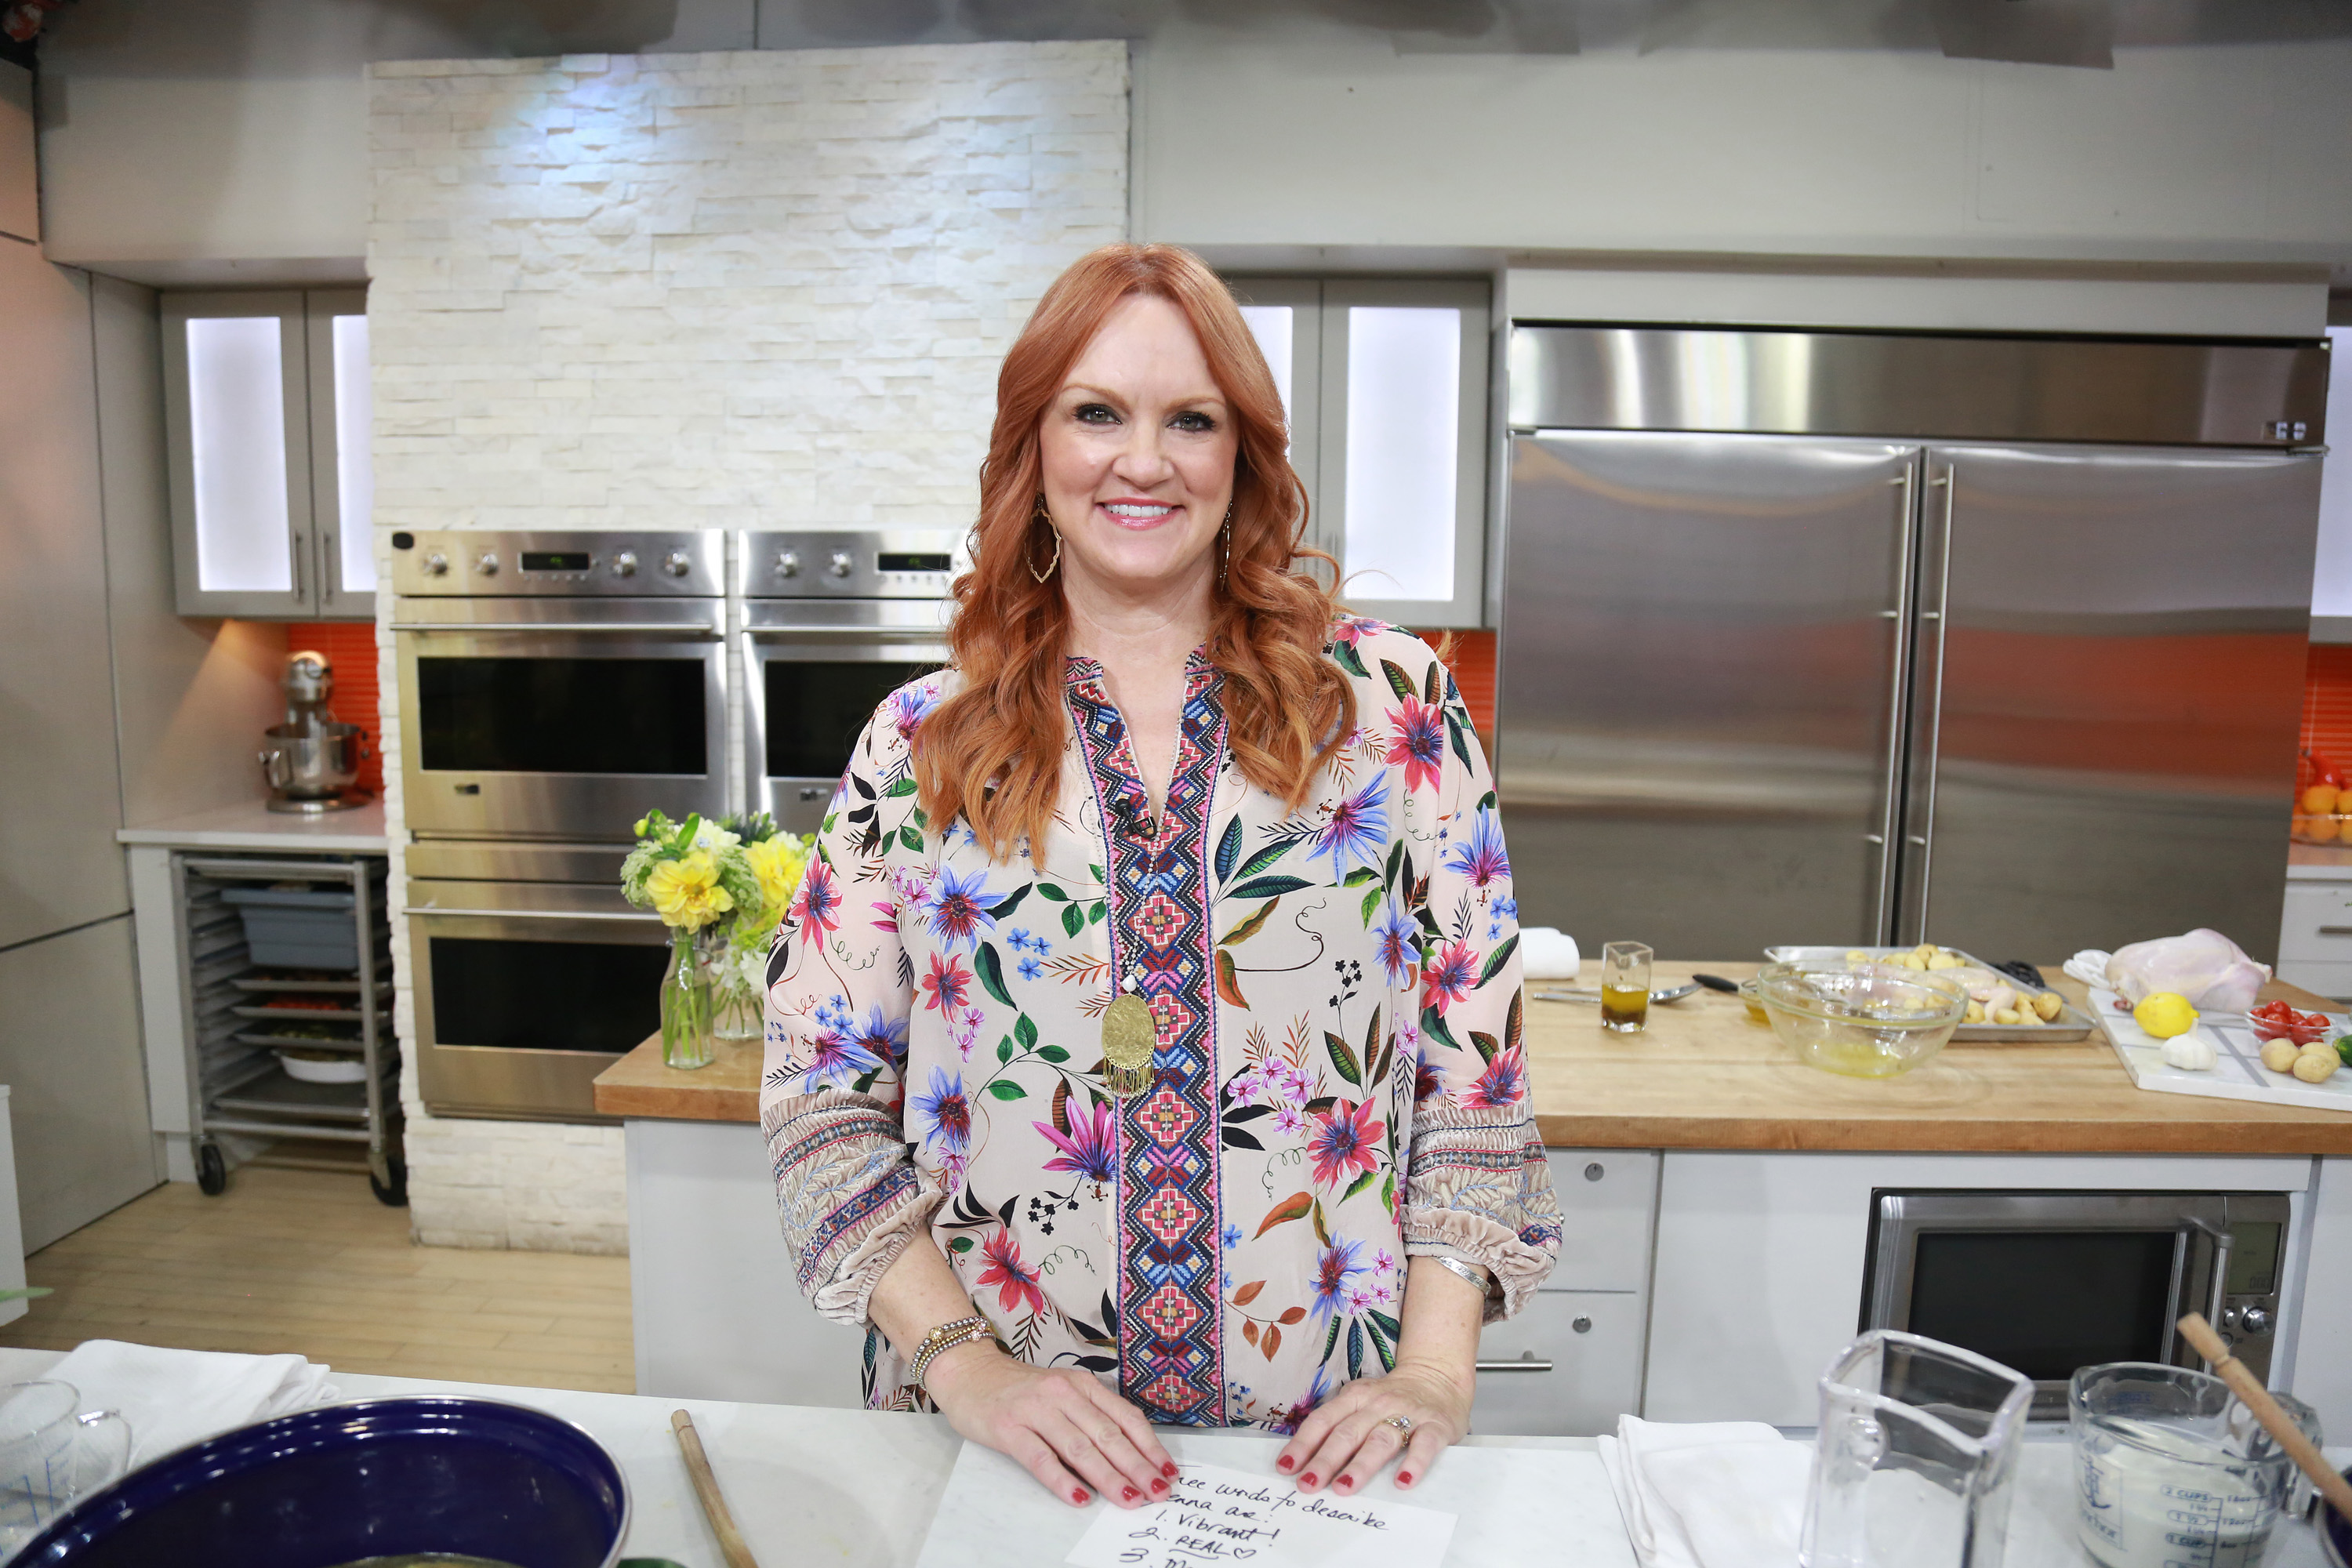 Ree Drummond wears a multi-print blouse in this photograph.